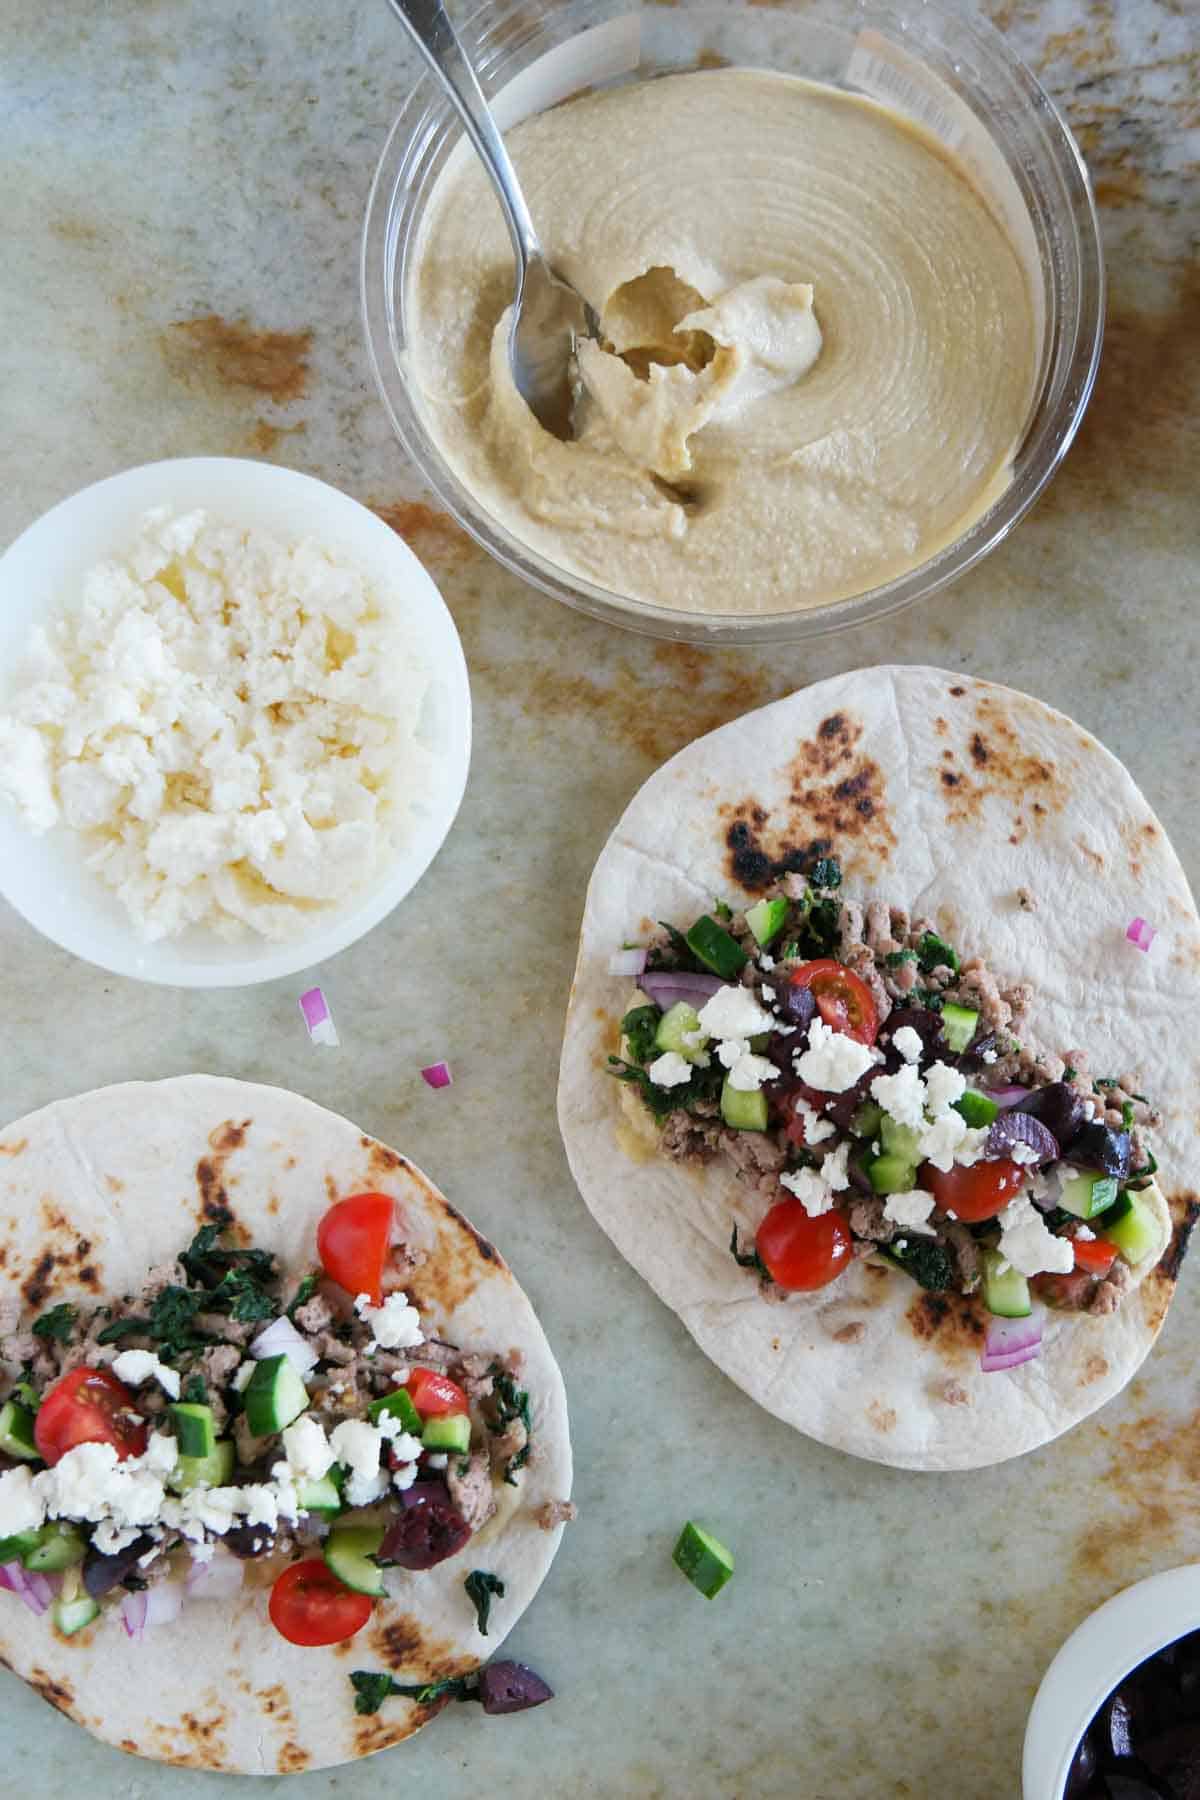 Greek tacos with spinach, feta, hummus, and ground turkey.